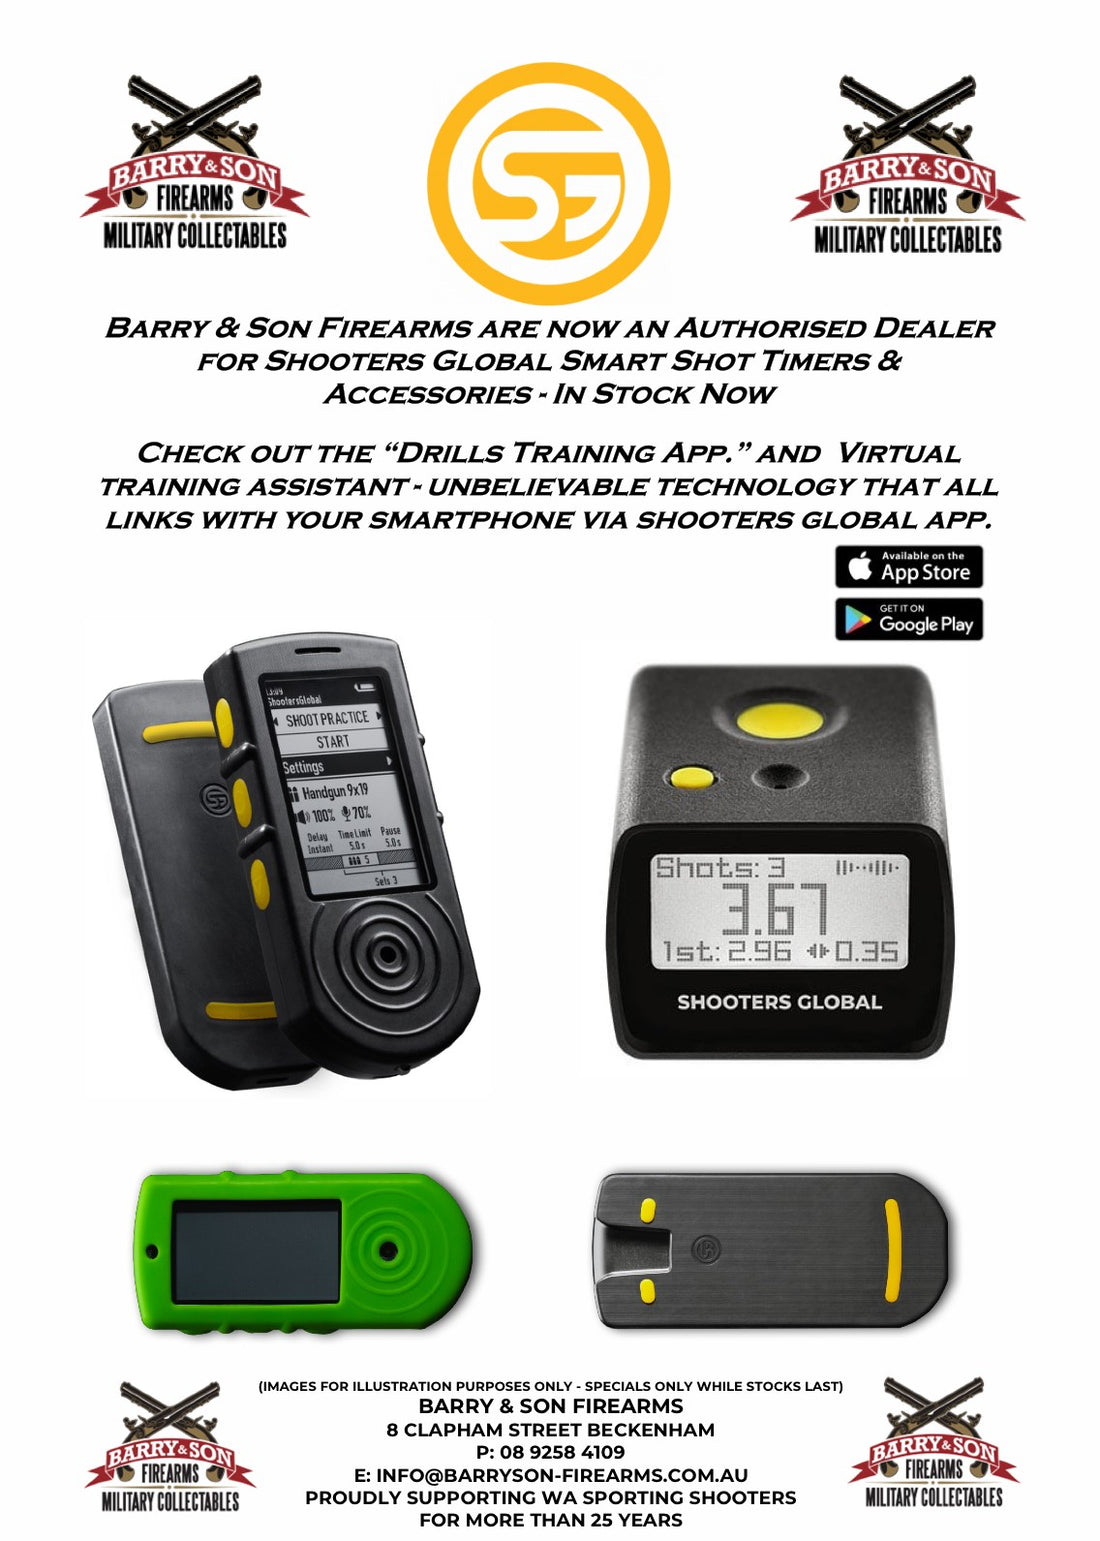 Shooters Global Smart Shot Timers and Accessories